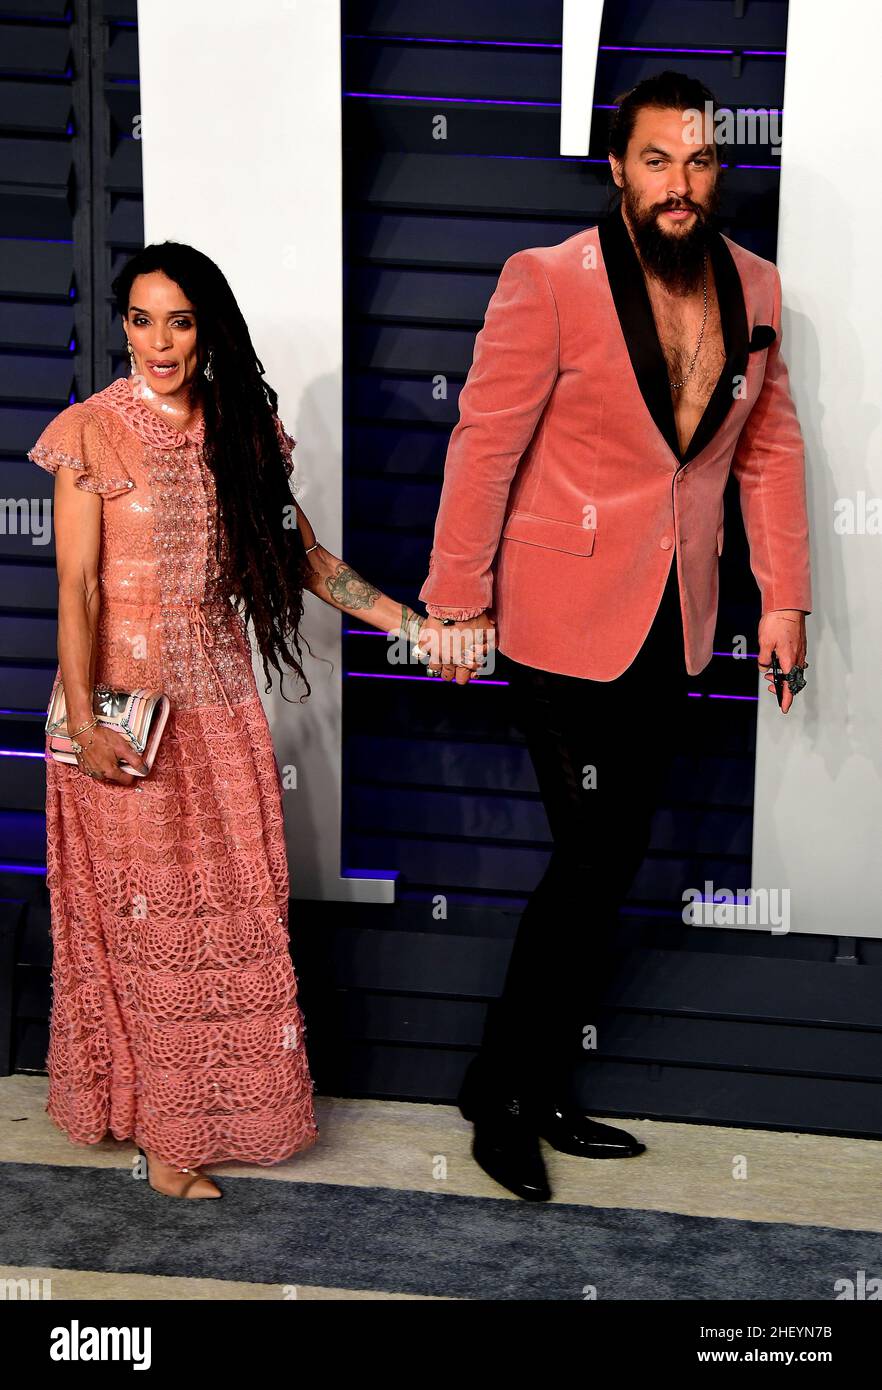 File photo dated 24/02/2019 of Lisa Bonet (left) and Jason Momoa who has announced that he and Lisa Bonet are separating but said the love between them 'carries on'. The 42-year-old Aquaman star said the couple are sharing the news so they can go about their lives 'with dignity and honesty'. Issue date: Thursday January 13, 2022. Stock Photo